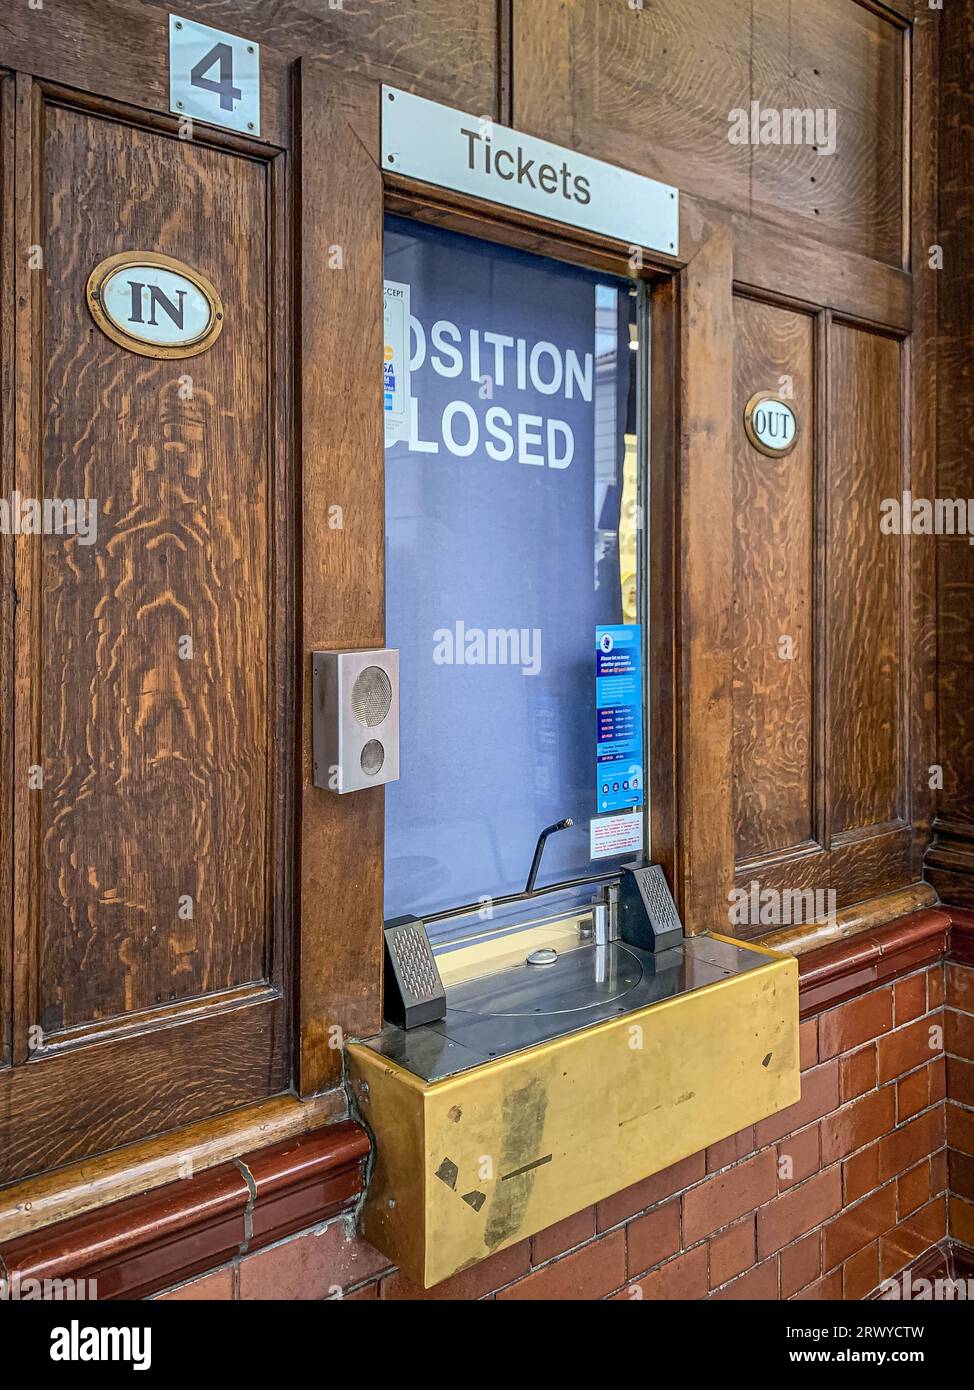 Ticket office at Manchester Victoria Station.  Sign says 'Position Closed' no train or rail sales Stock Photo